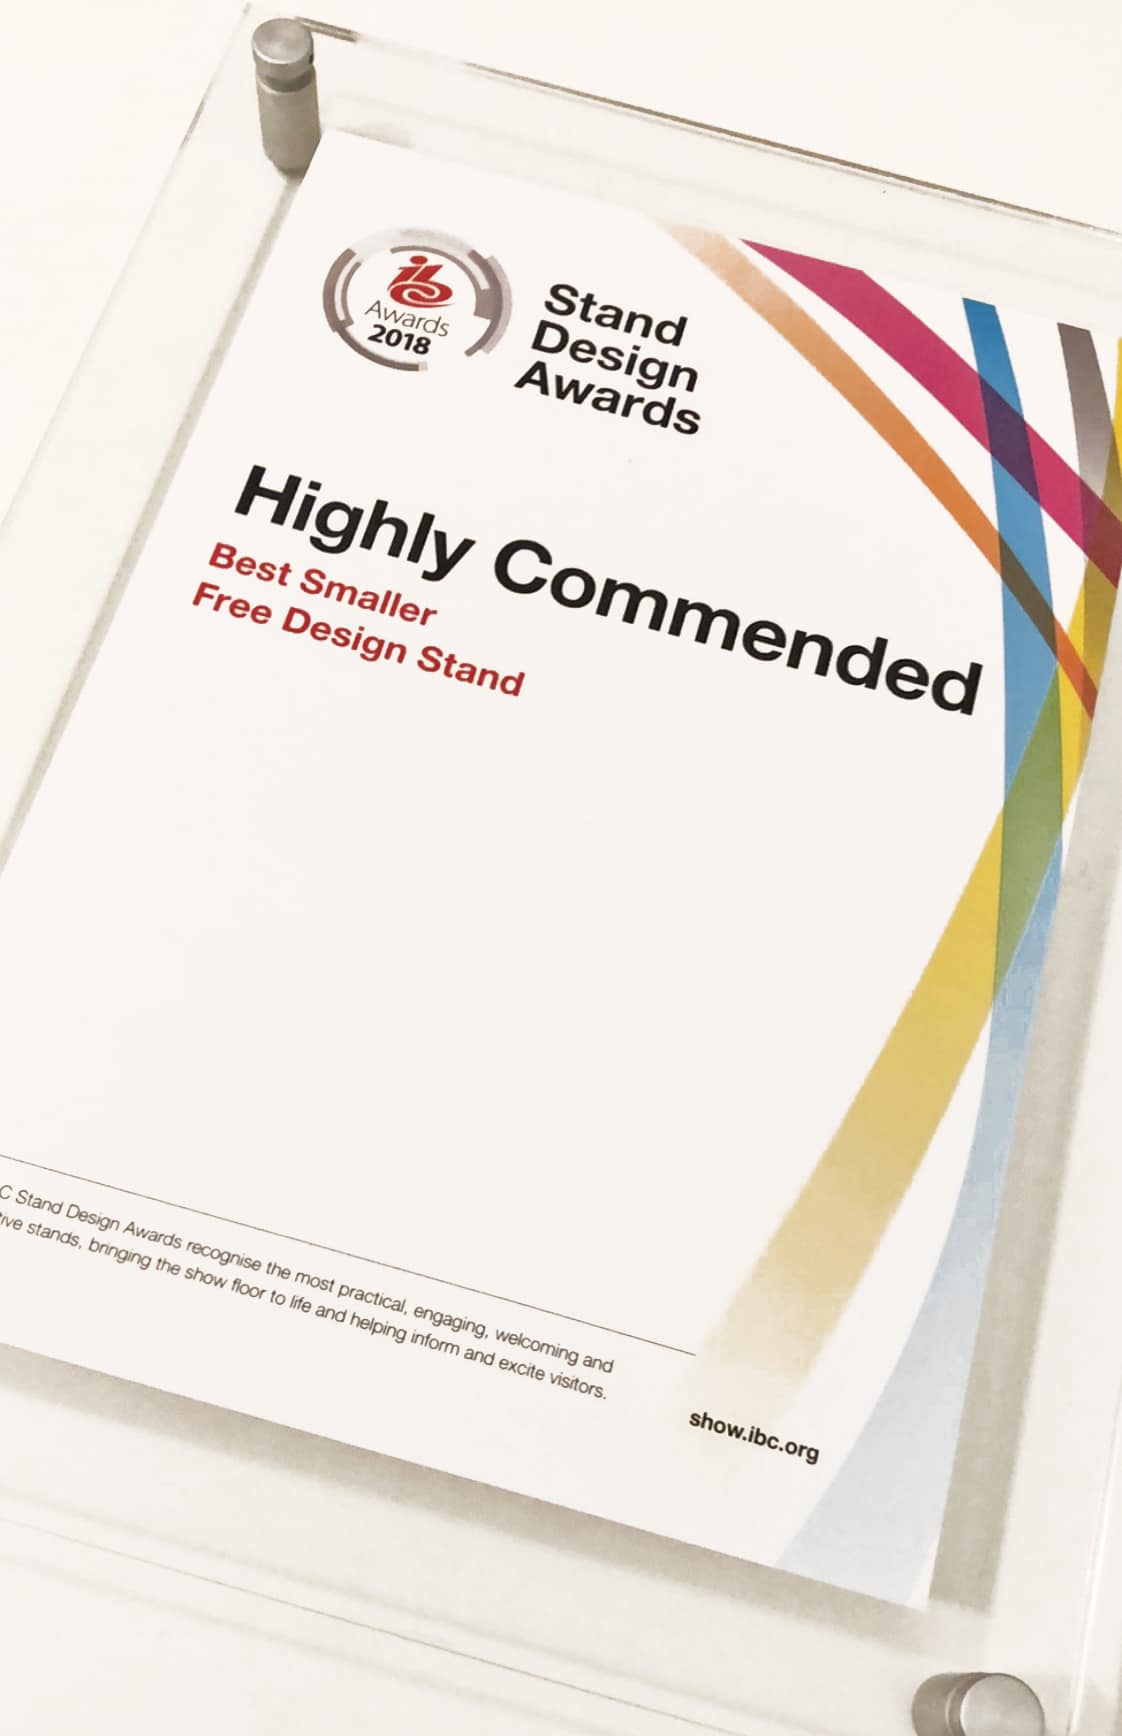 Photo Of Stand Designs Awards As Highly Commended As Best Smaller Free Design At Ibc Plaque Sign